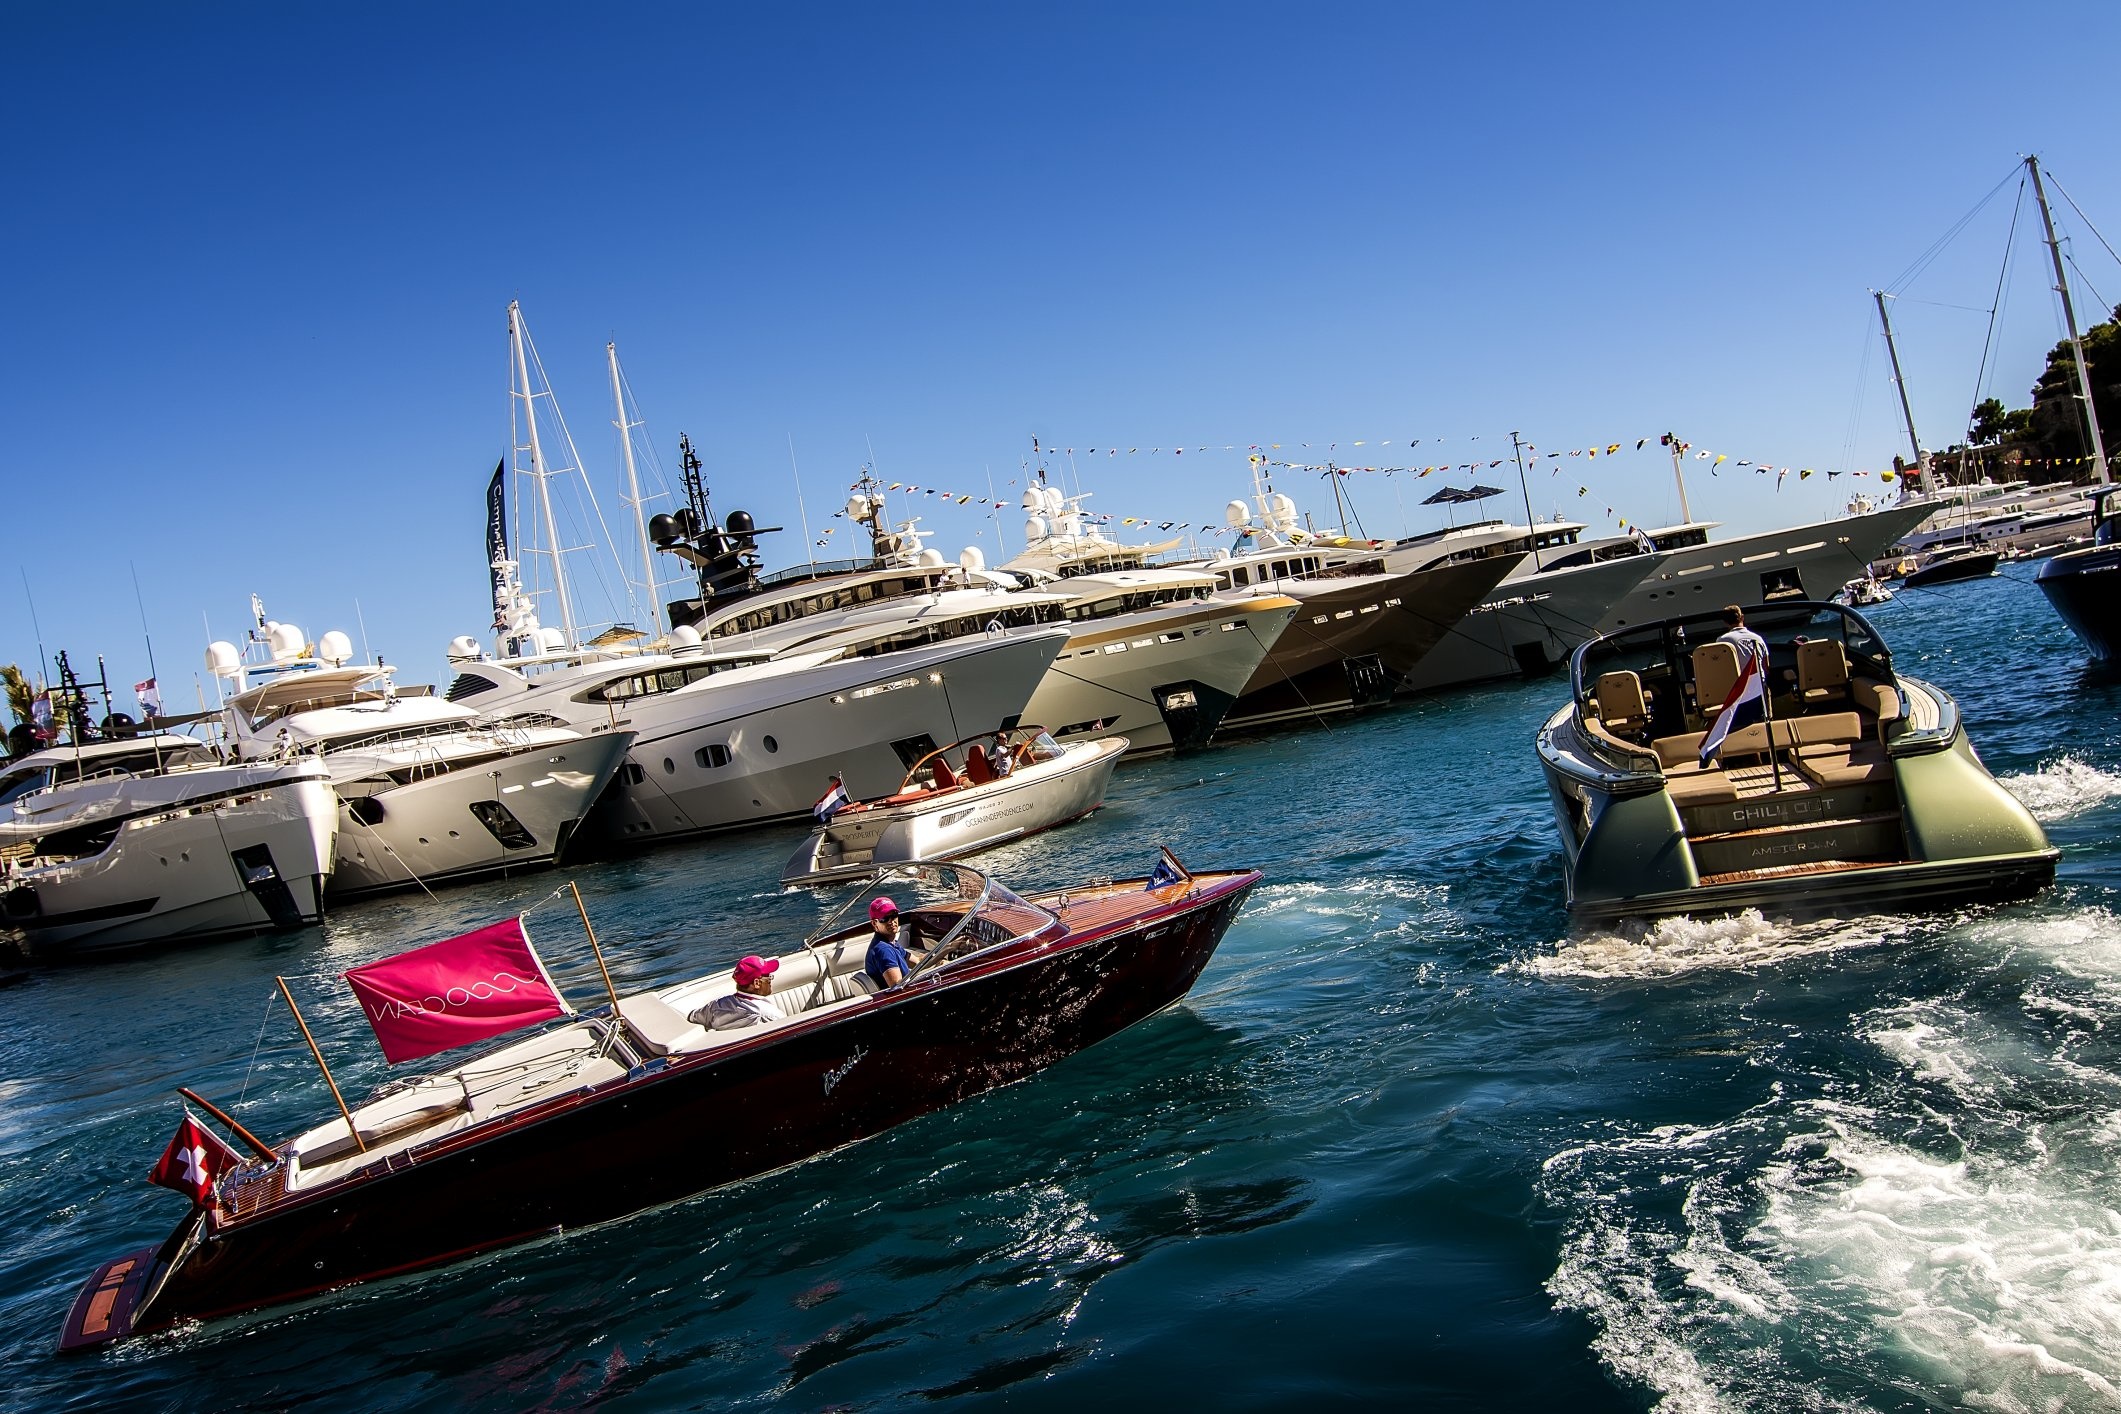 The Monaco Yacht Show For Luxury Yachts The Complete 2021 & 2022